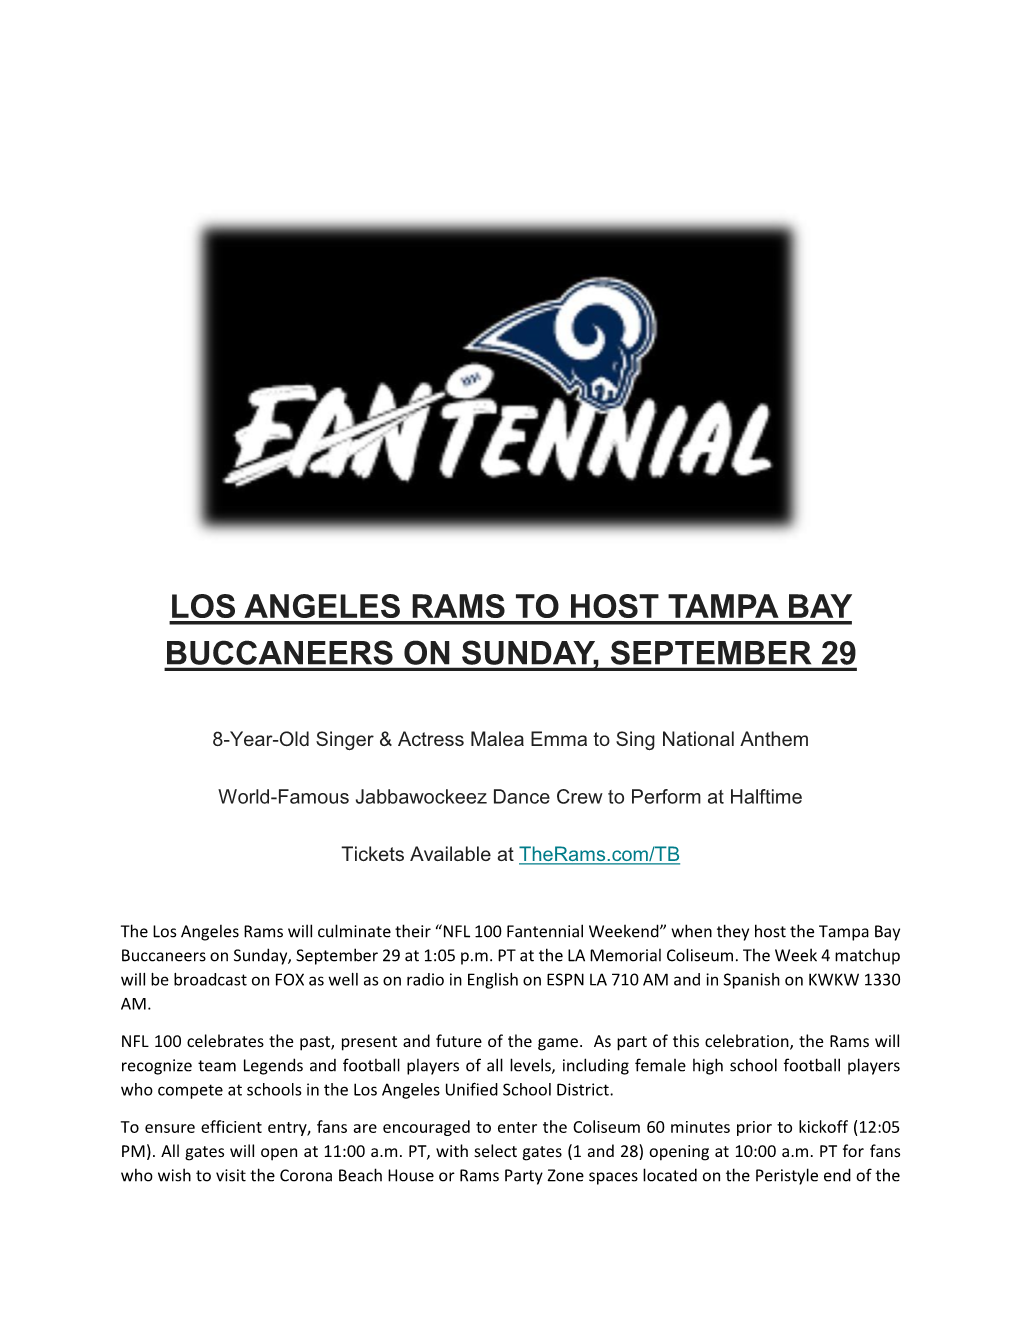 Los Angeles Rams to Host Tampa Bay Buccaneers on Sunday, September 29